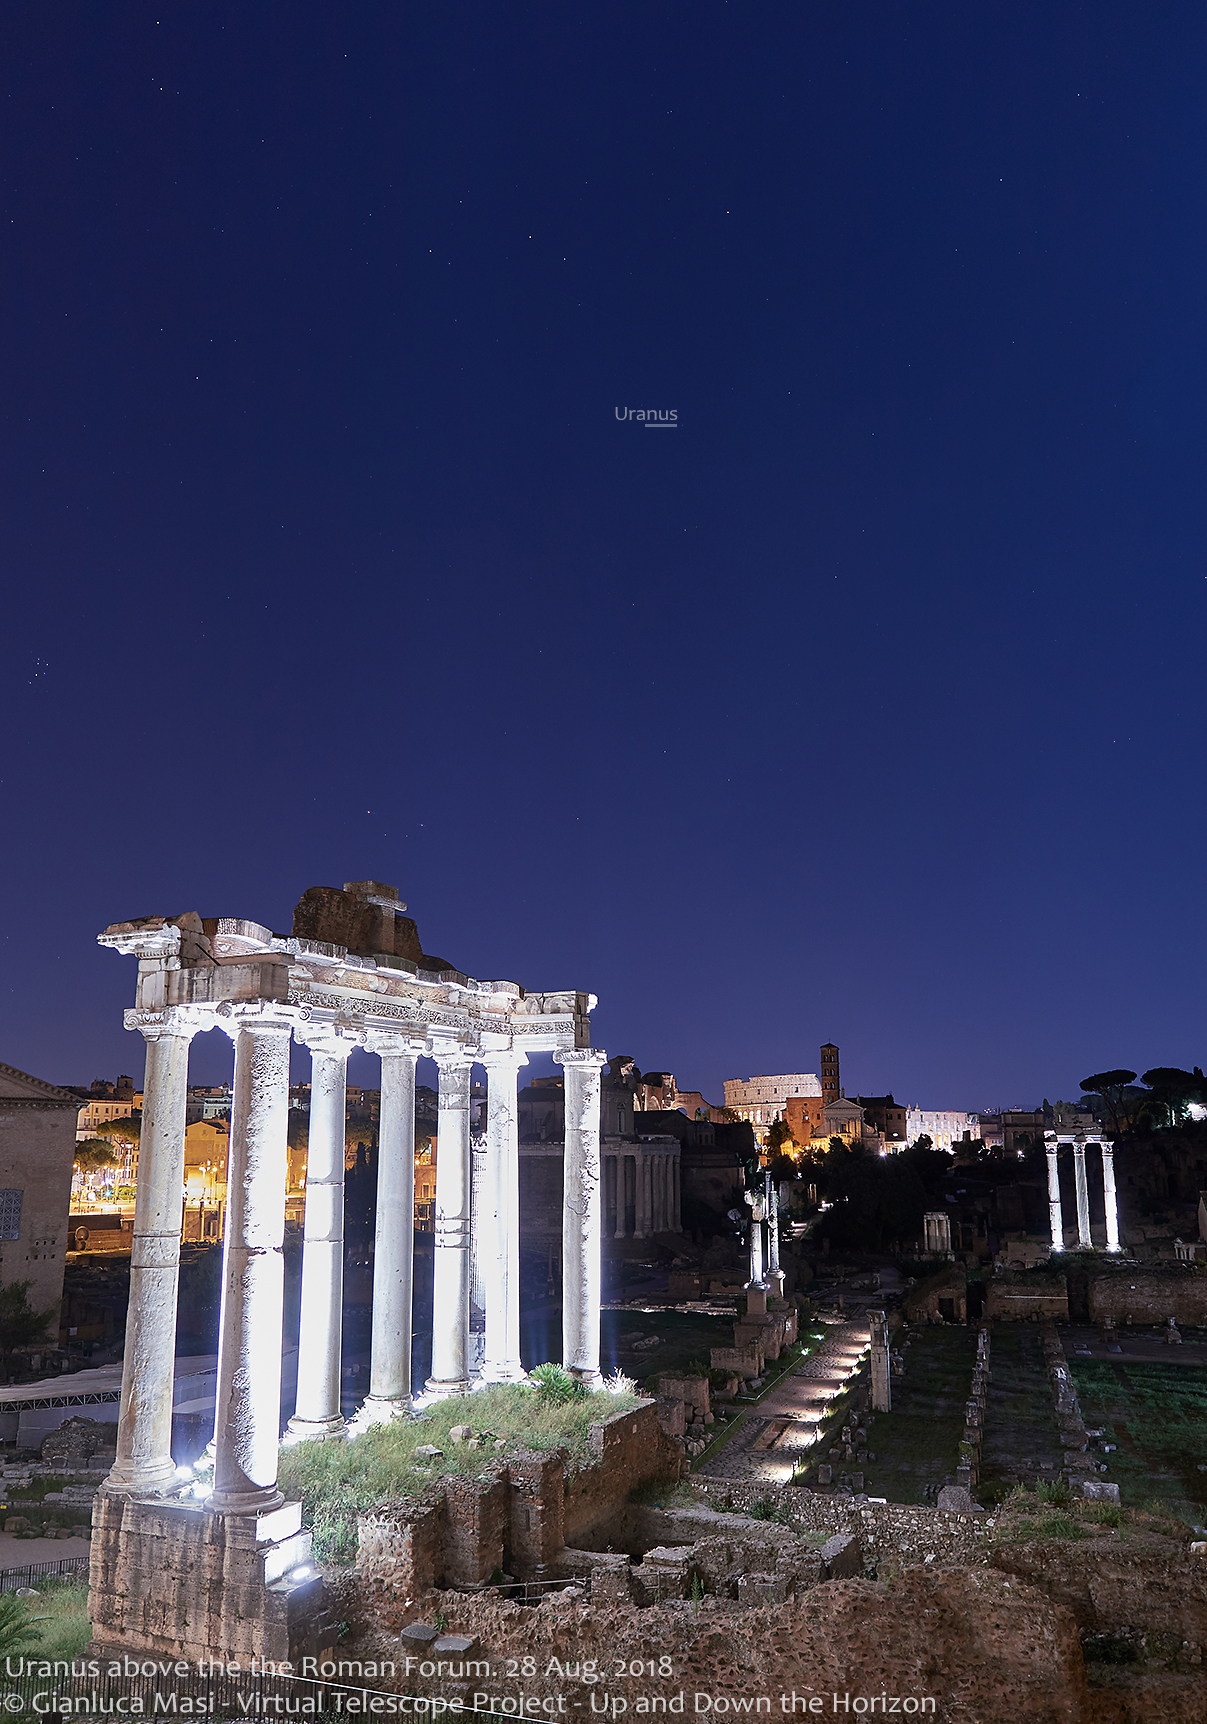 Uranus is discreetly shining above the Roman Forum, with the Pleiades visible on the left - 28 Aug. 2018